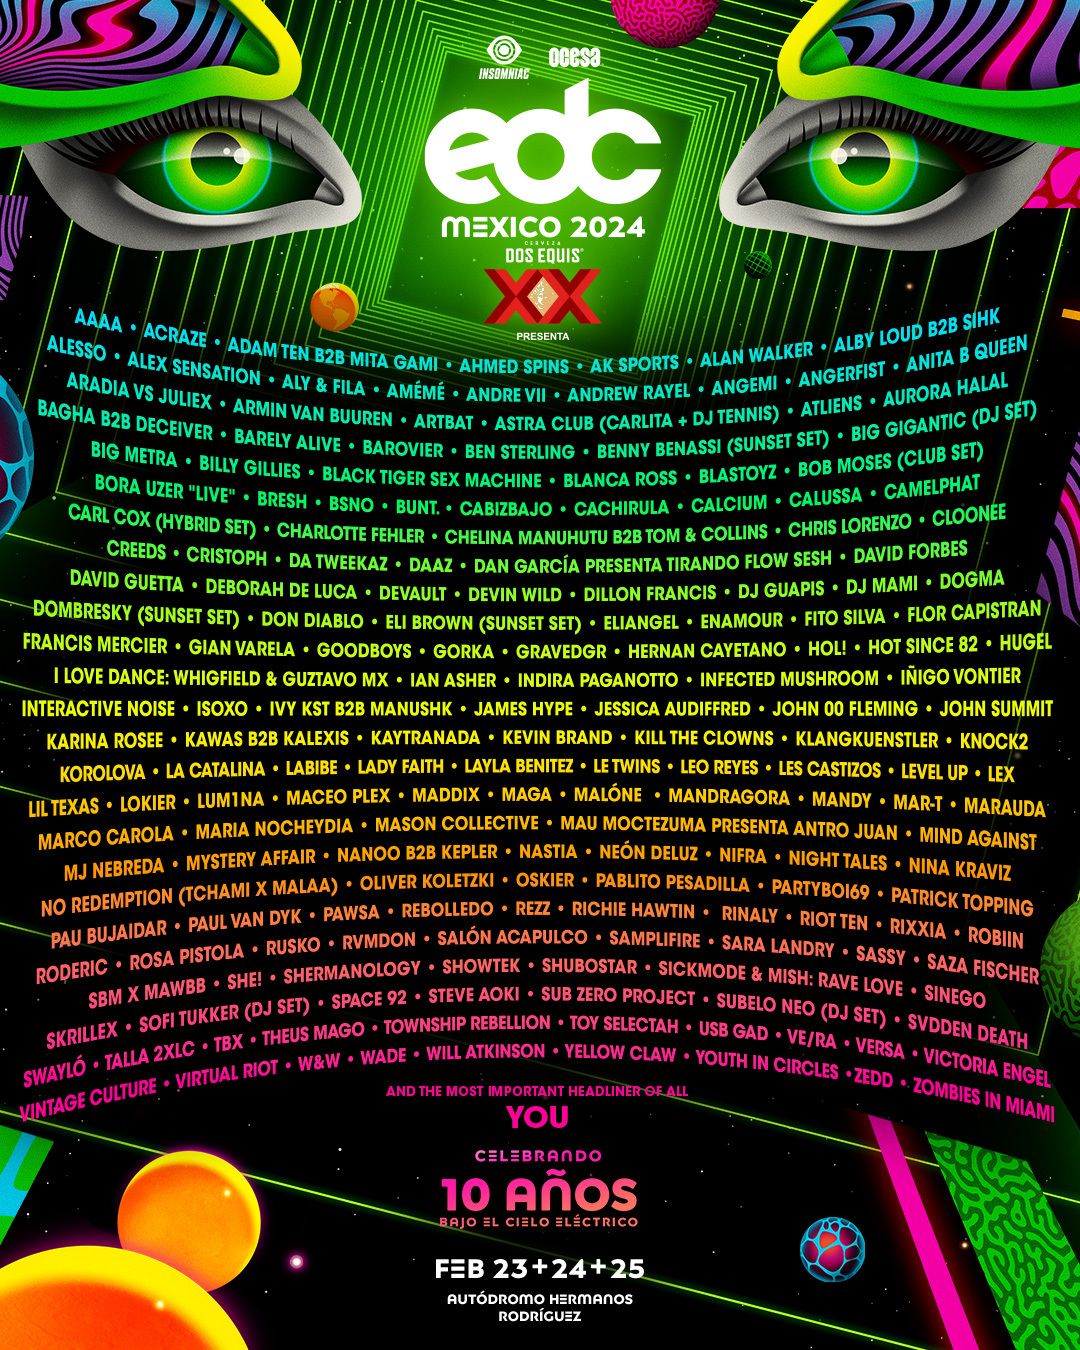 EDC Mexico 2024 Unveils Massive Lineup with 196 Artists That Festival